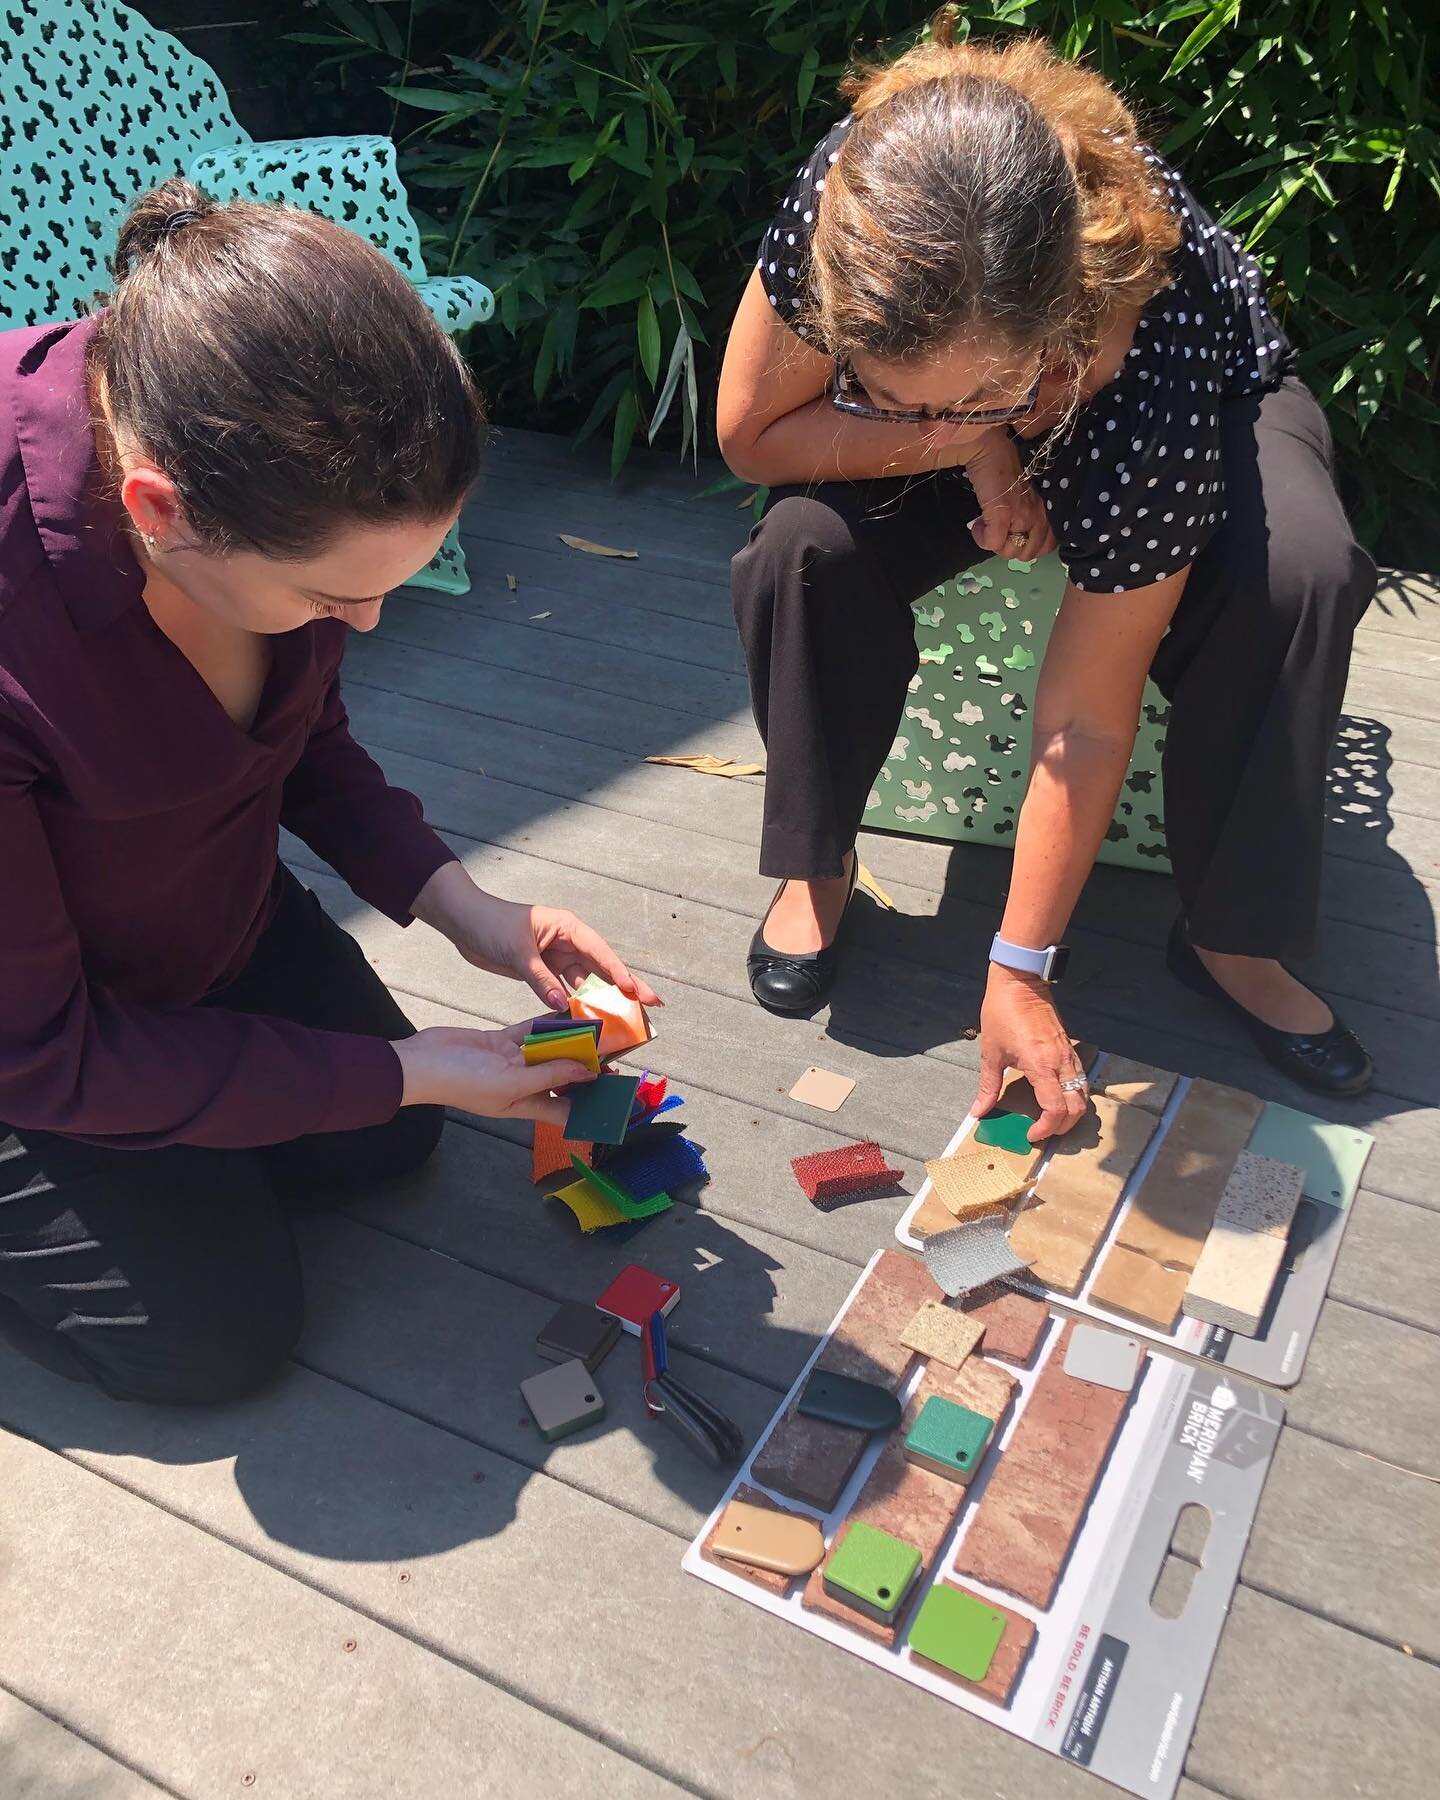 Le Corbusier described color as the &ldquo;daughter of light&rdquo;. With that in mind, we enjoy making our color selections outside in the sunshine.  #playstructures  #colorpalette  #multifamilyhousing